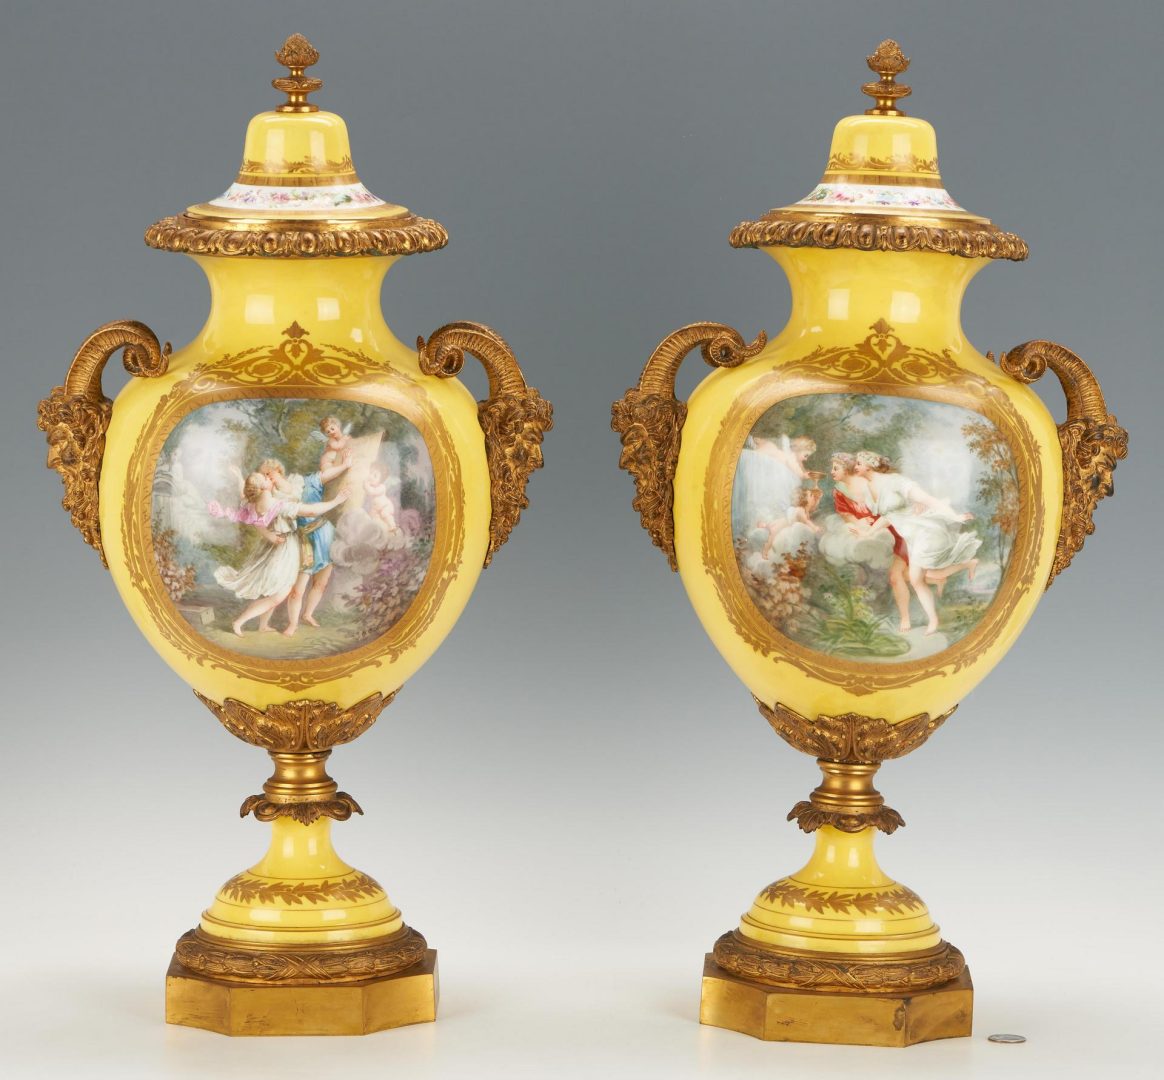 Lot 77: Large Pair of Sevres Style Bronze Mounted Decorated Porcelain Urns